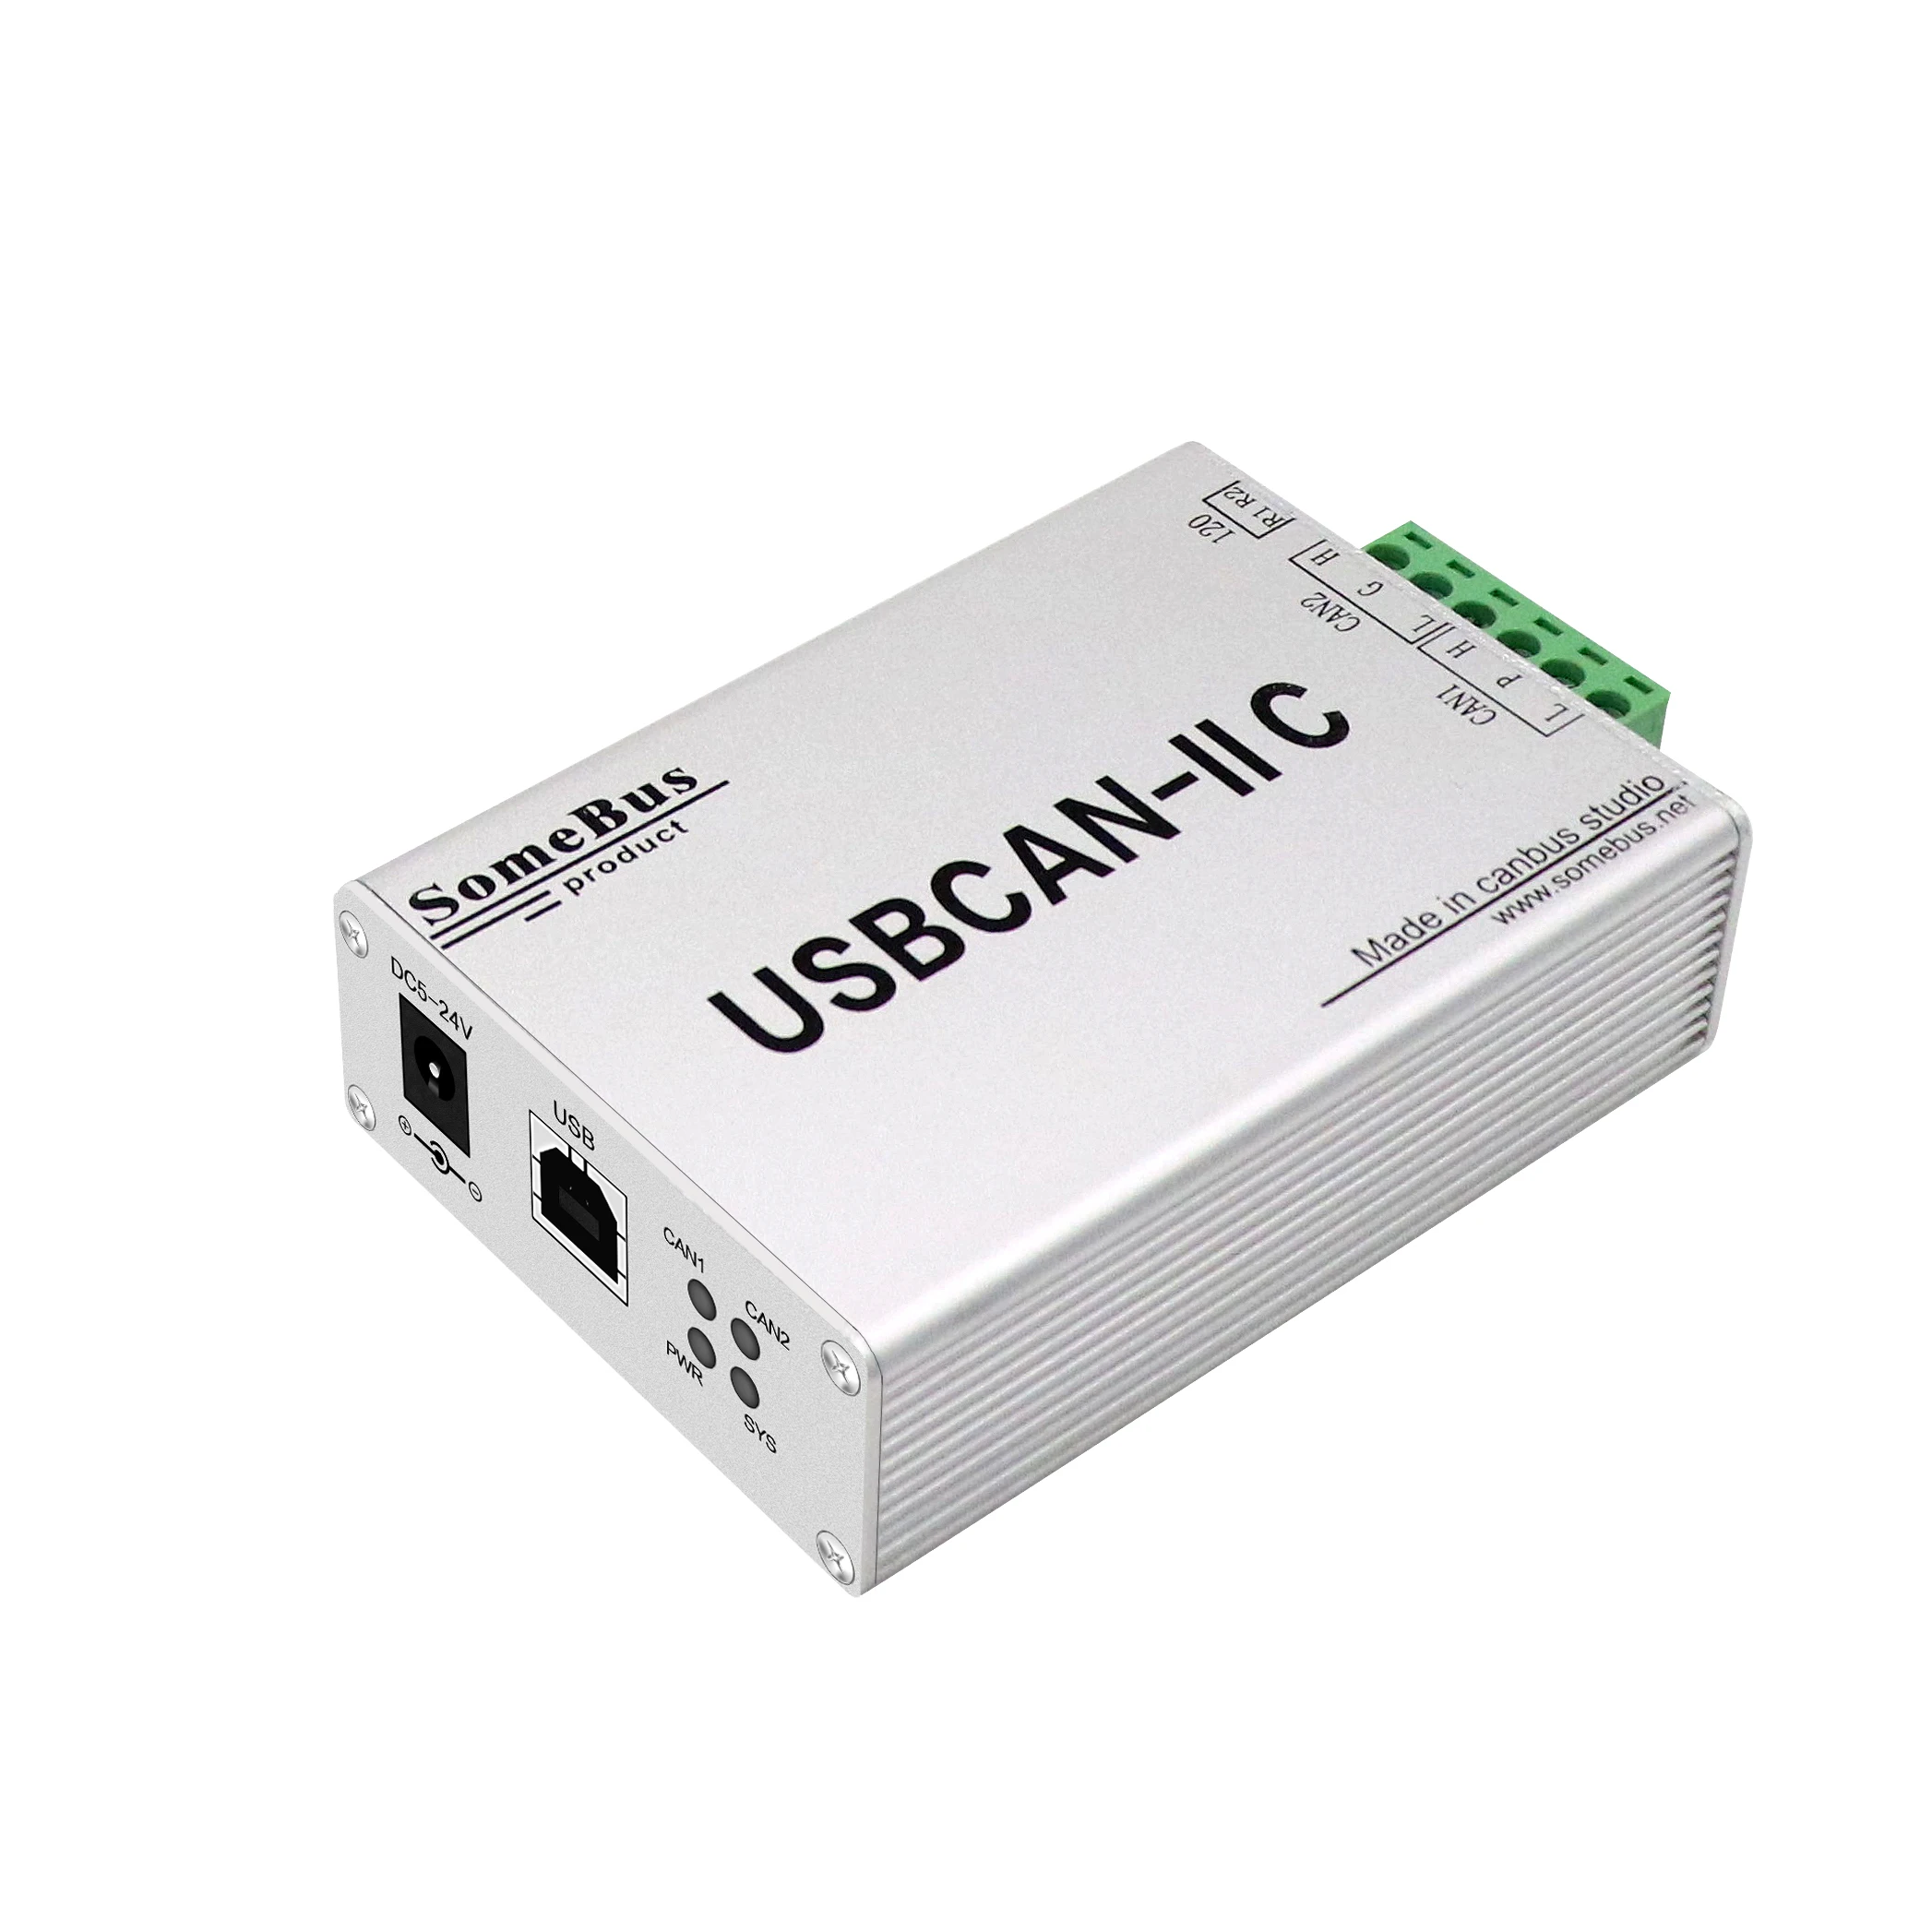 CAN Bus Analyzer Canopenj1939 USBCAN-IIC USB to CAN Adapter Dual Channel